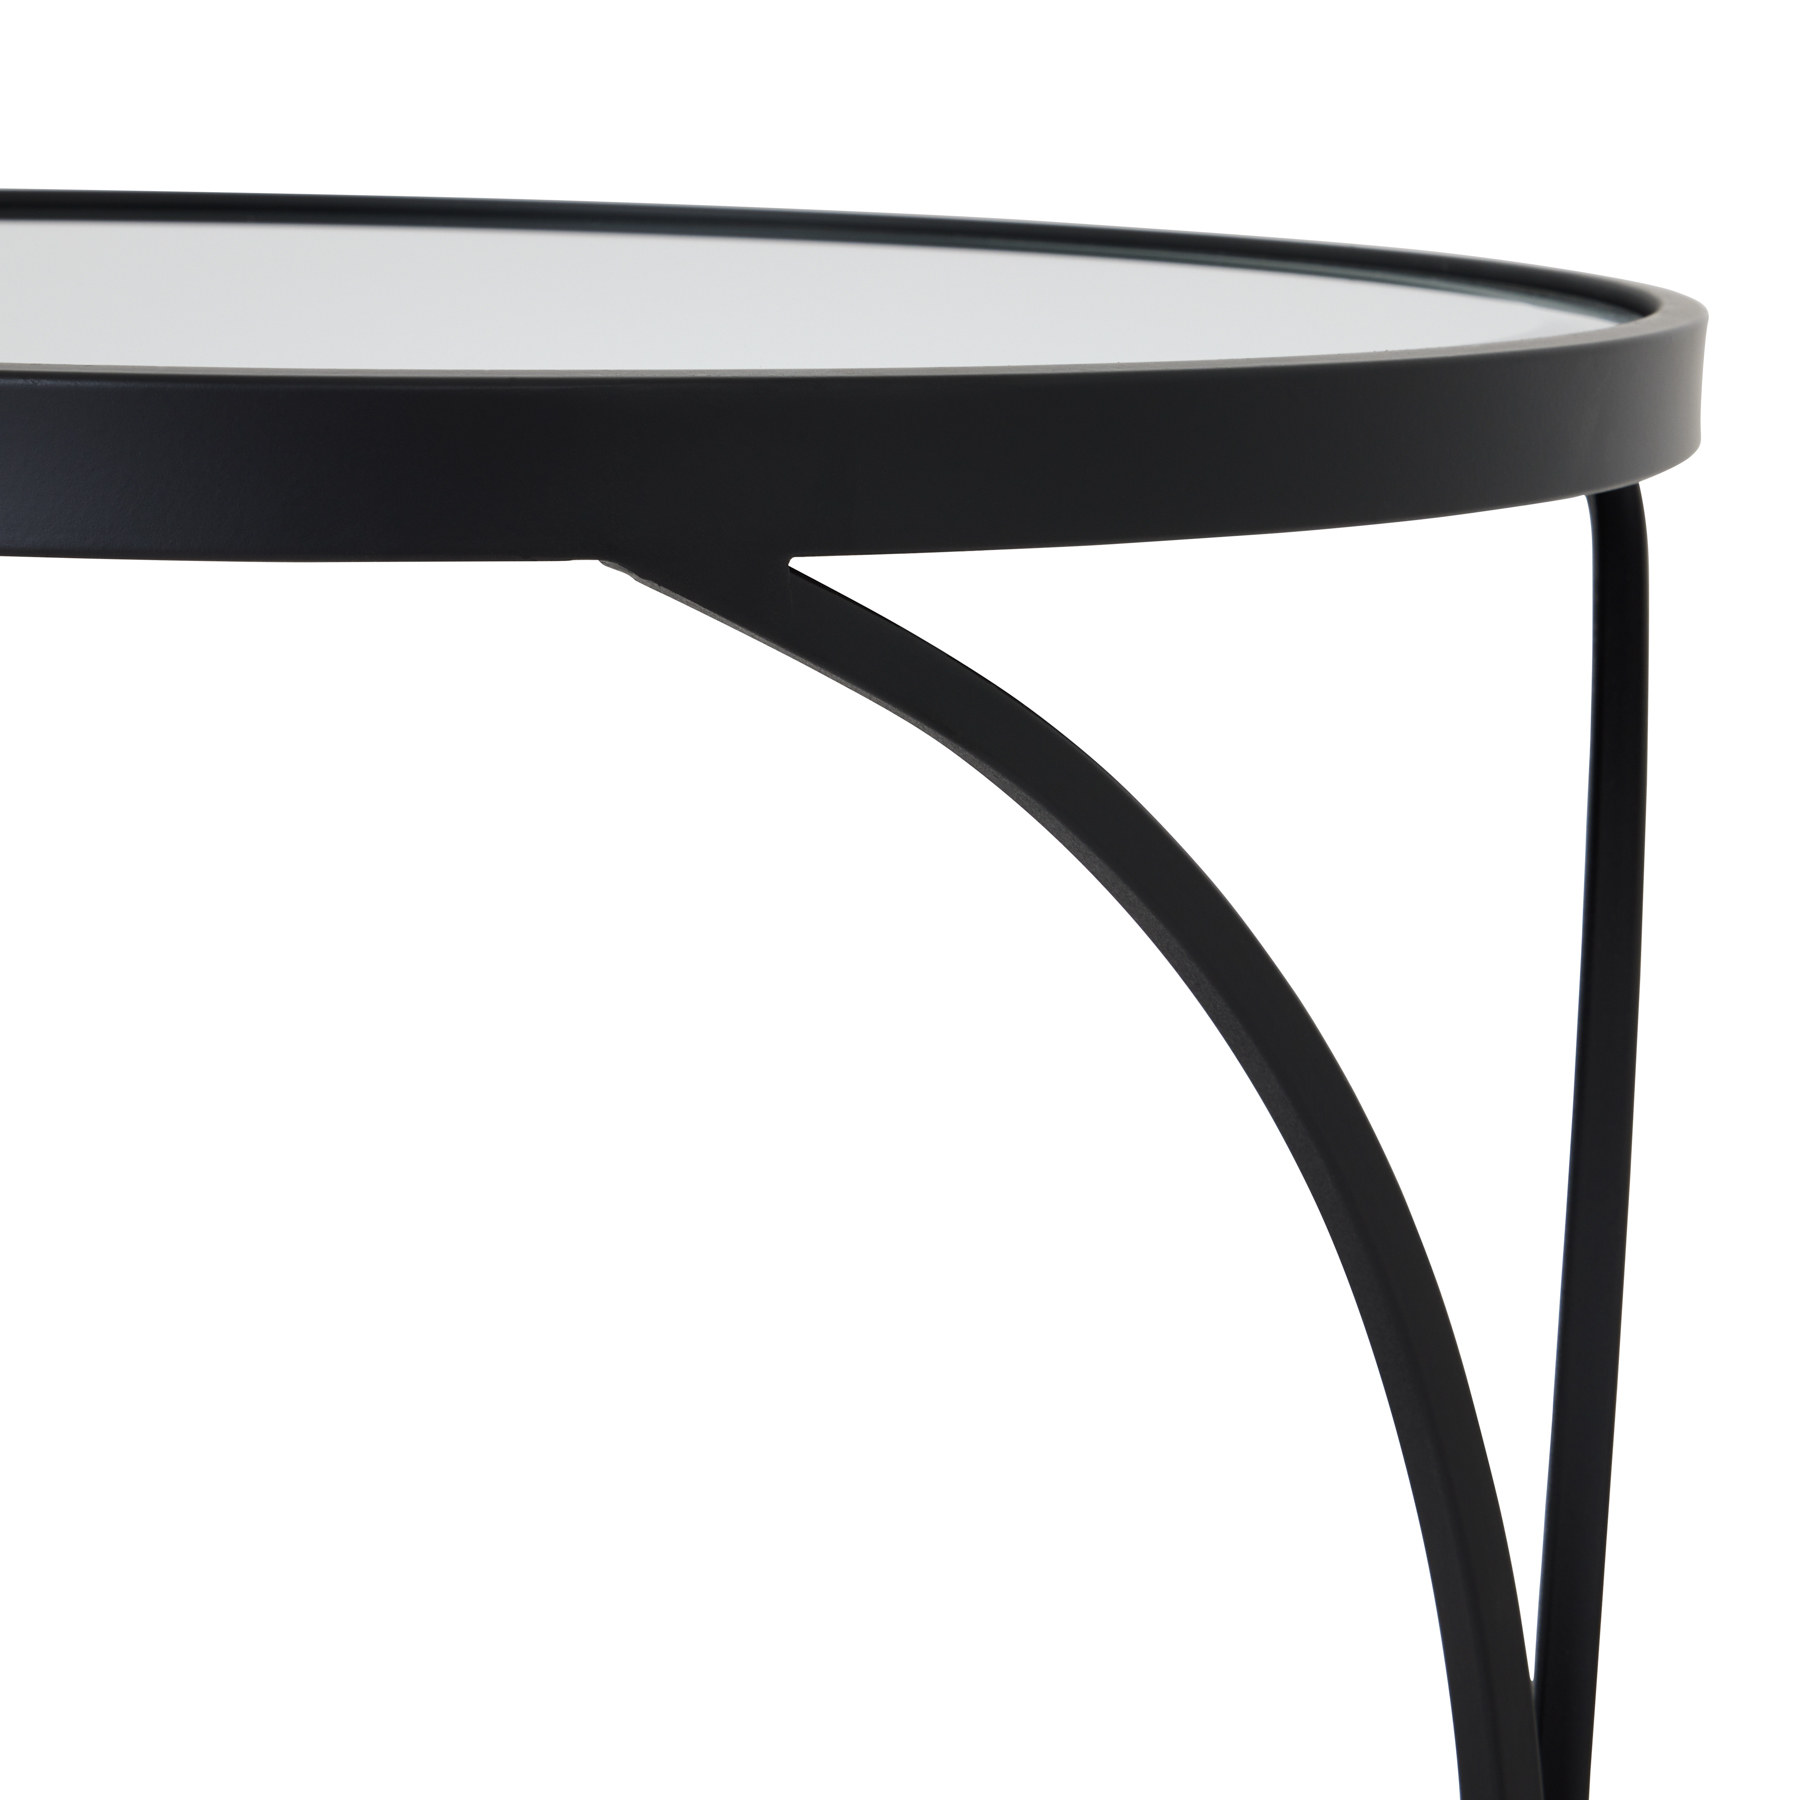 Concaved Set Of Two Black Mirrored Side Tables - Image 3